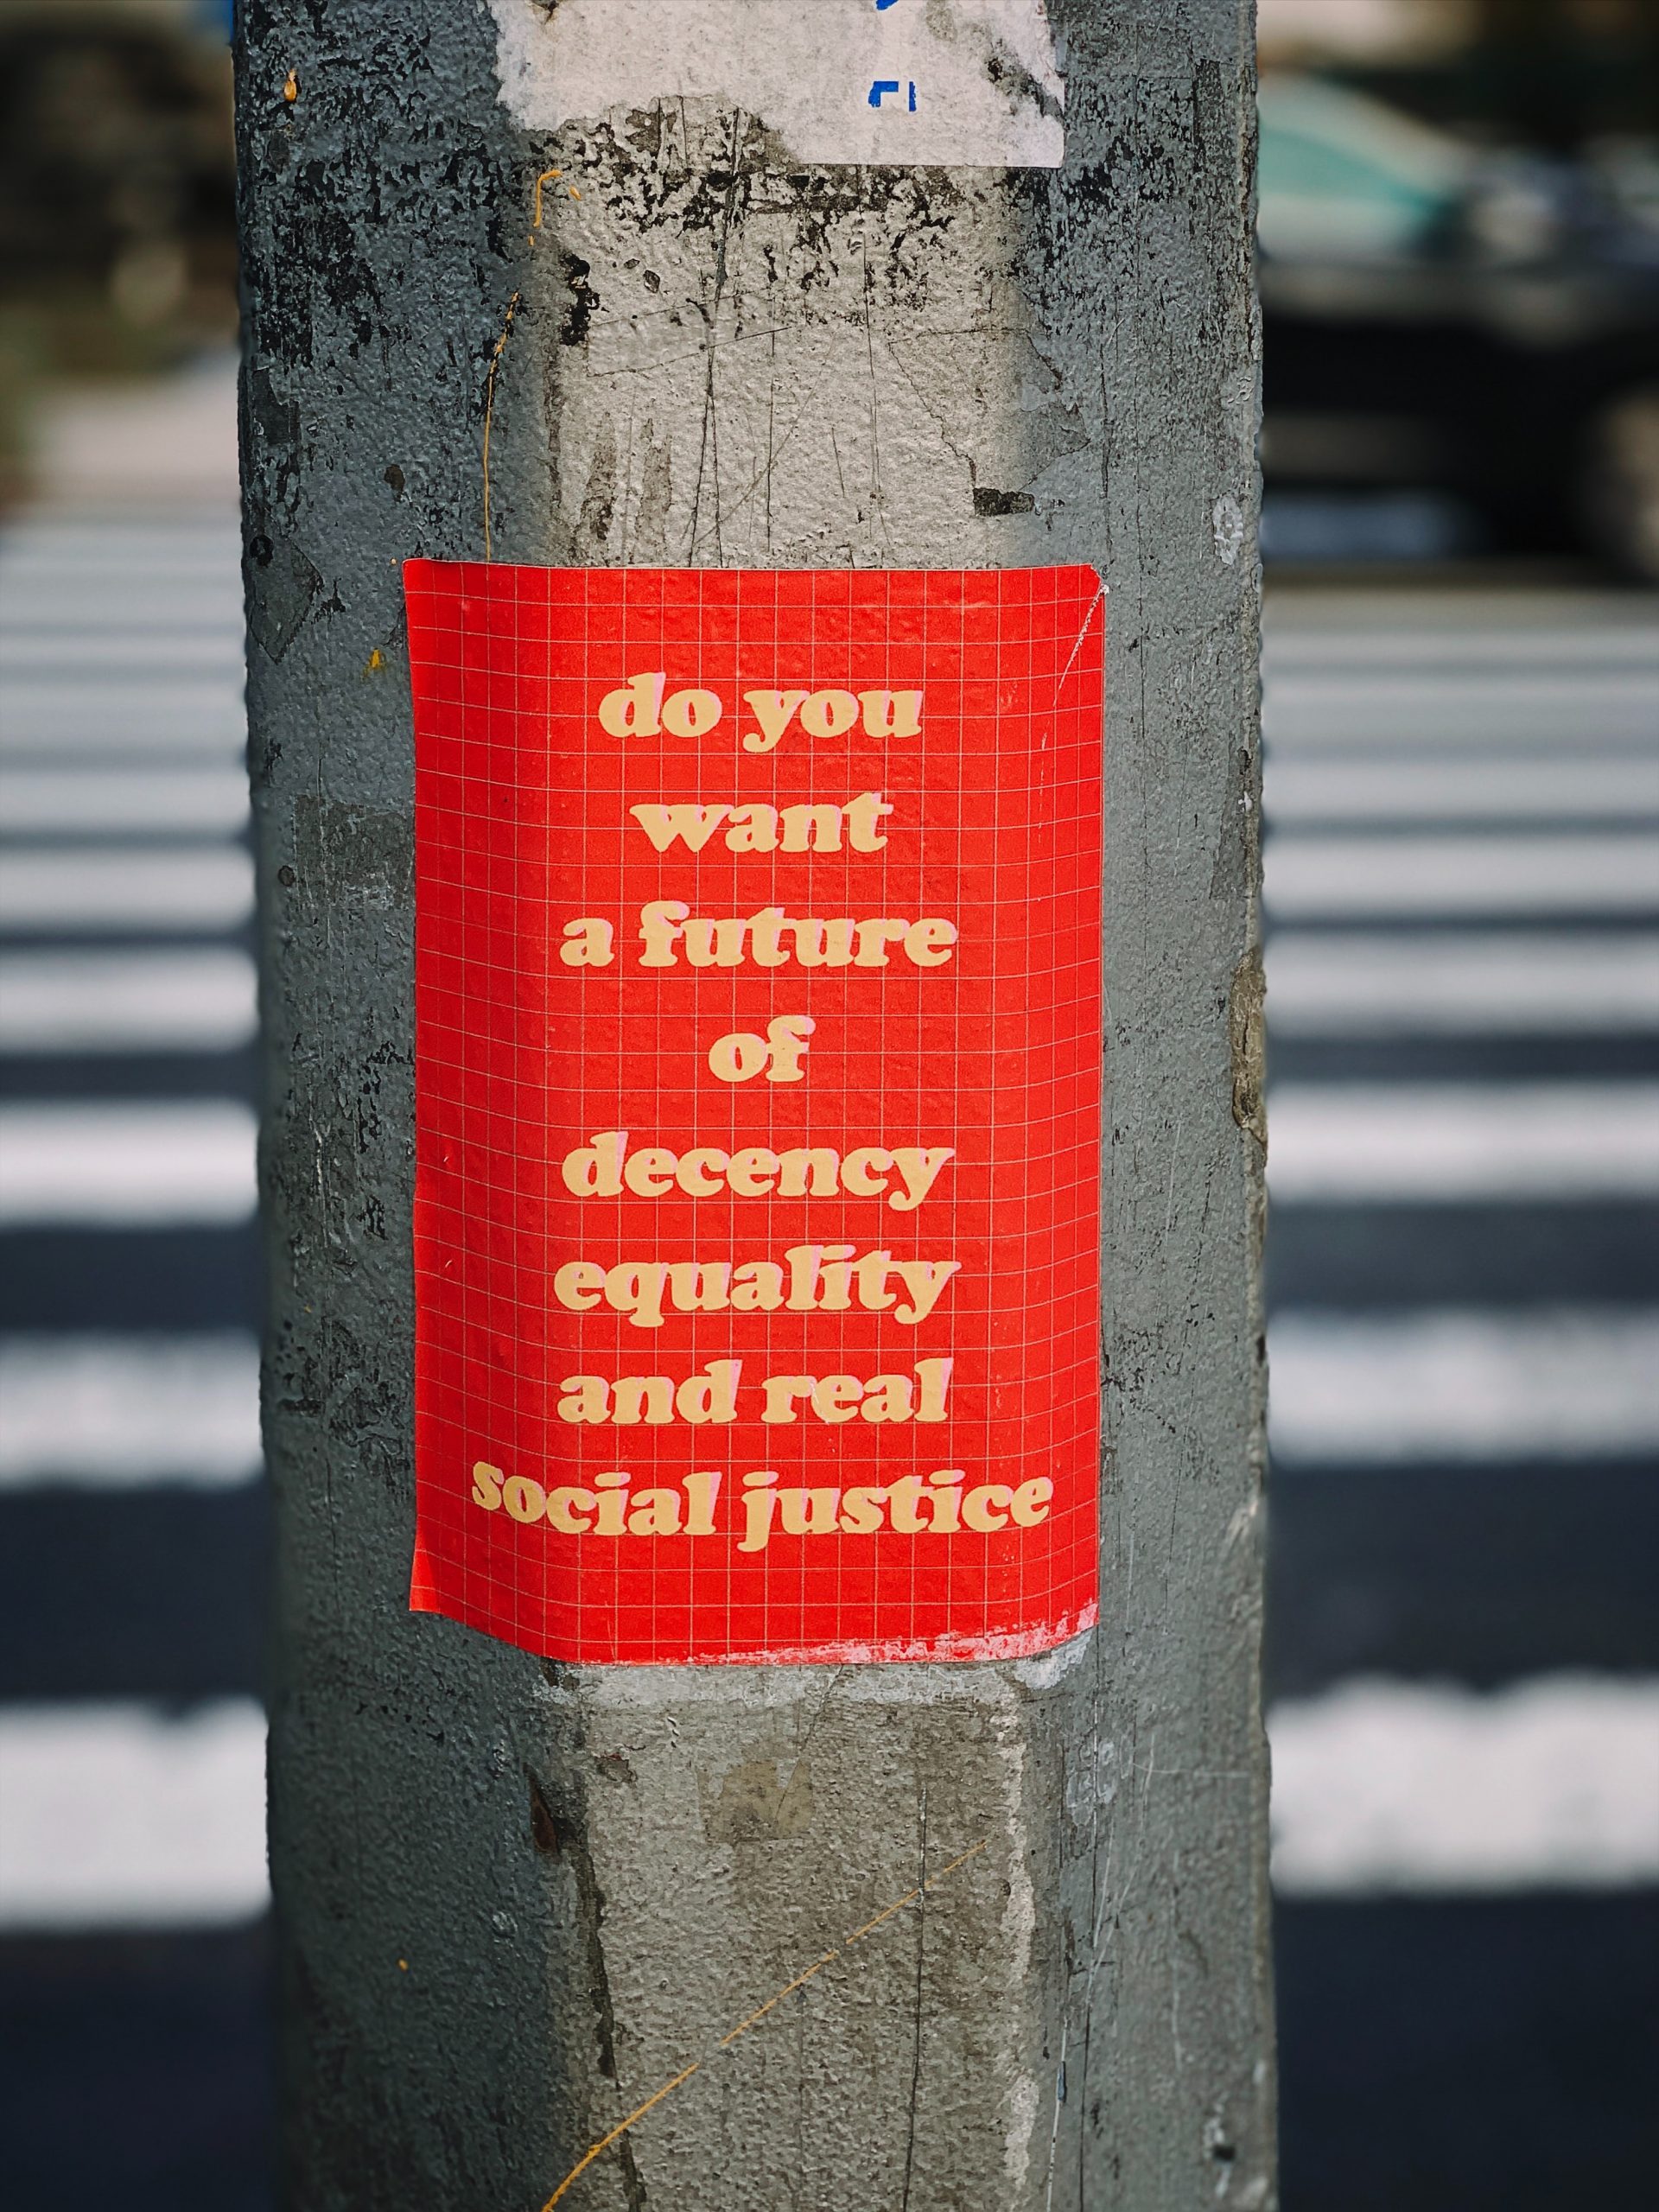 A red sticker with yellow lettering reads: "do you want a future of decency equality and